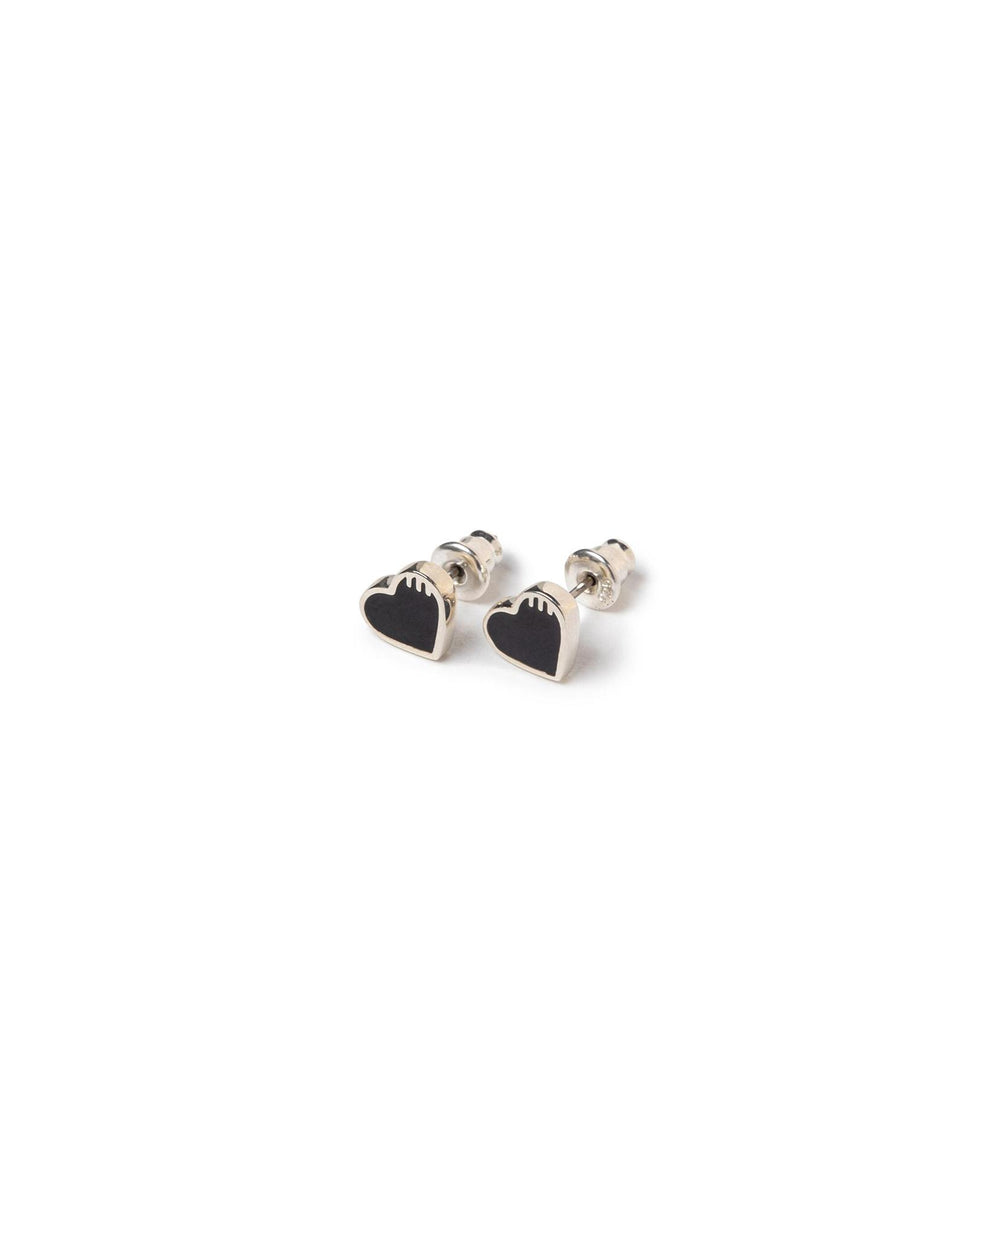 Human Made Heart Silver Earring | STASHED